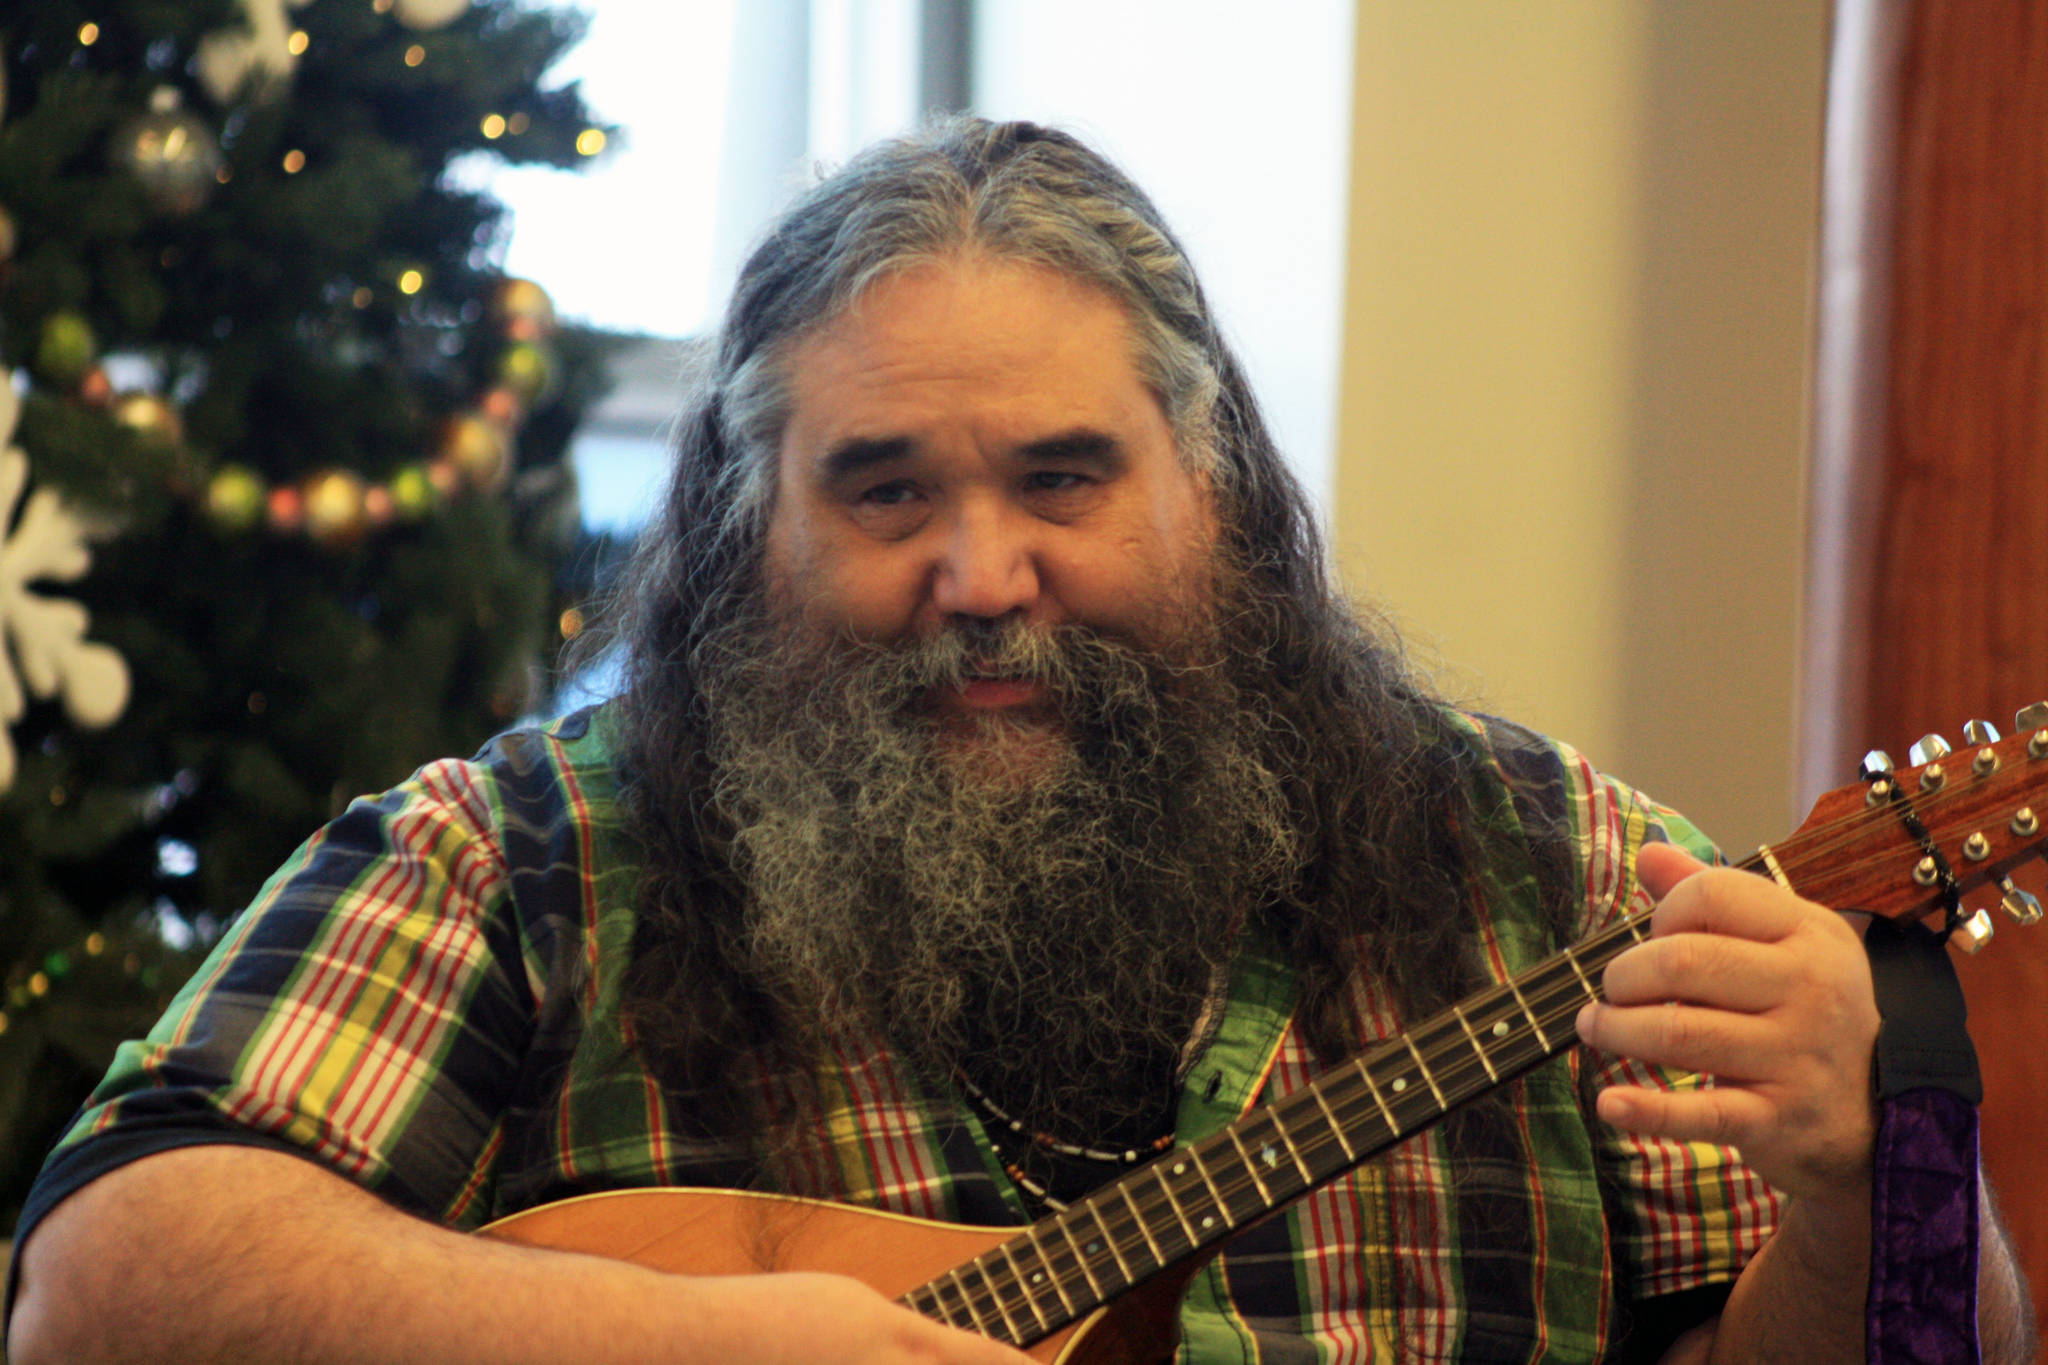 Local musician George Demientieff Holly sings and plays mandolin during a Dec. 21 winter solstice performance at Dena’ina Wellness Center in downtown Kenai. (Photo by Erin Thompson/Peninsula Clarion)